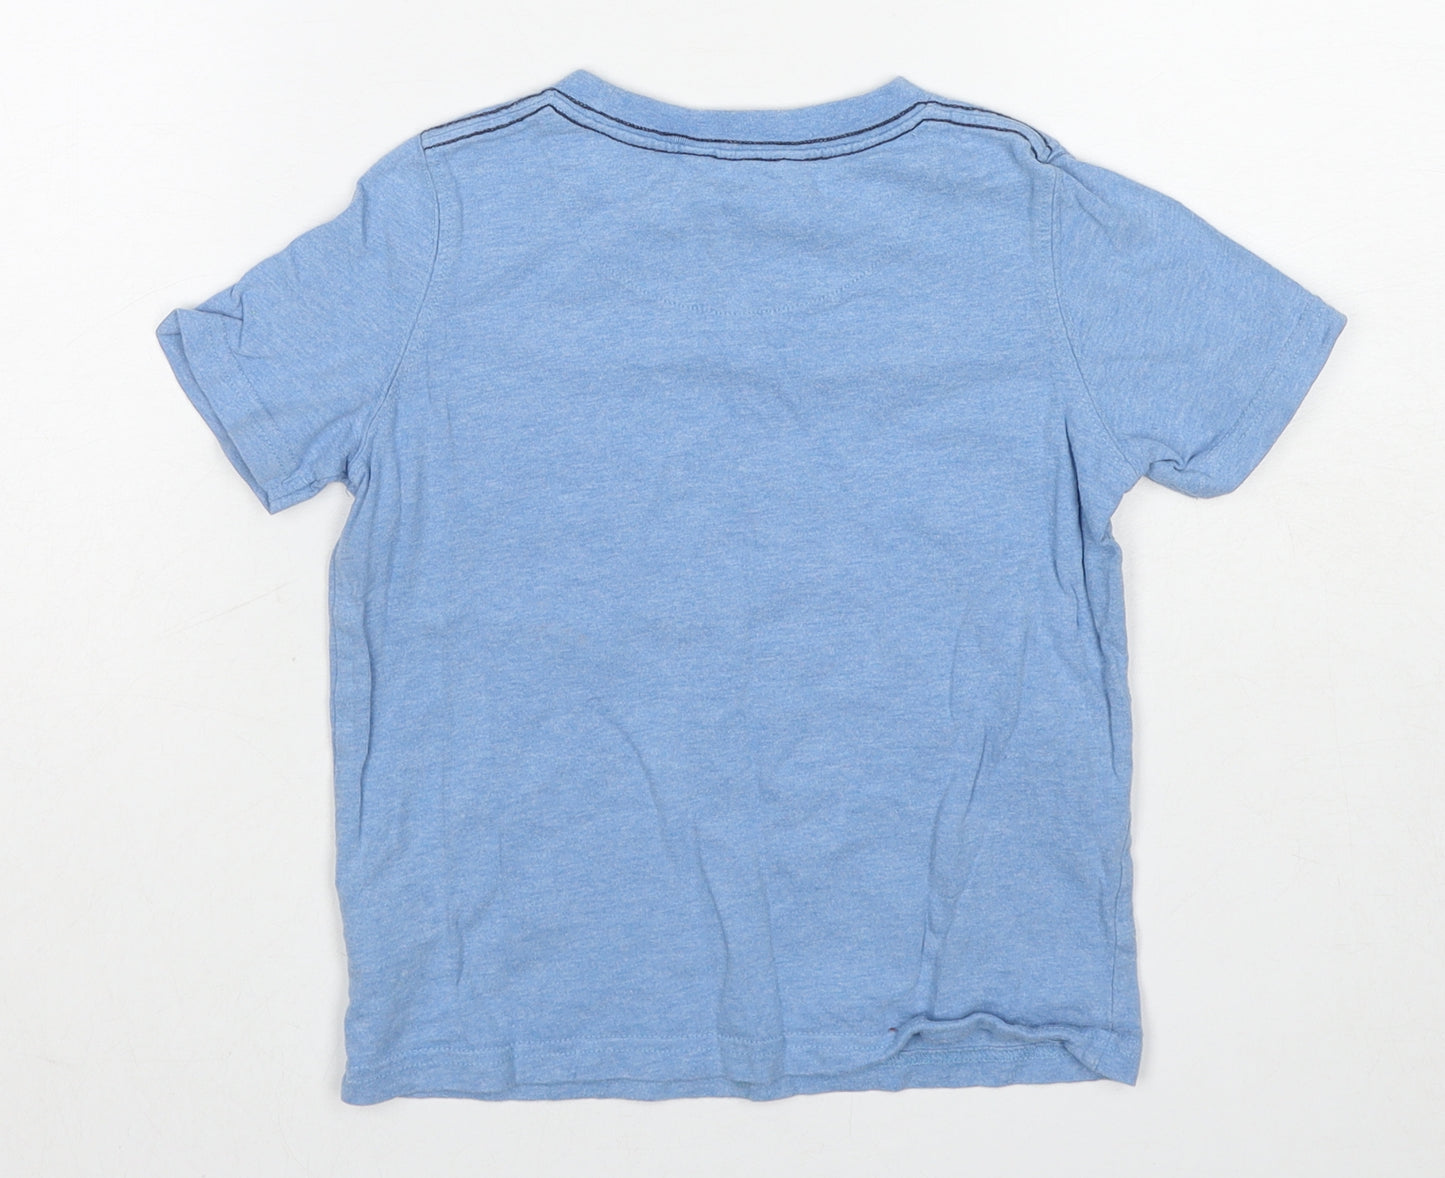 John Lewis Boys Blue Cotton Basic T-Shirt Size 6 Years Round Neck Pullover - Totally Jawsome Shark